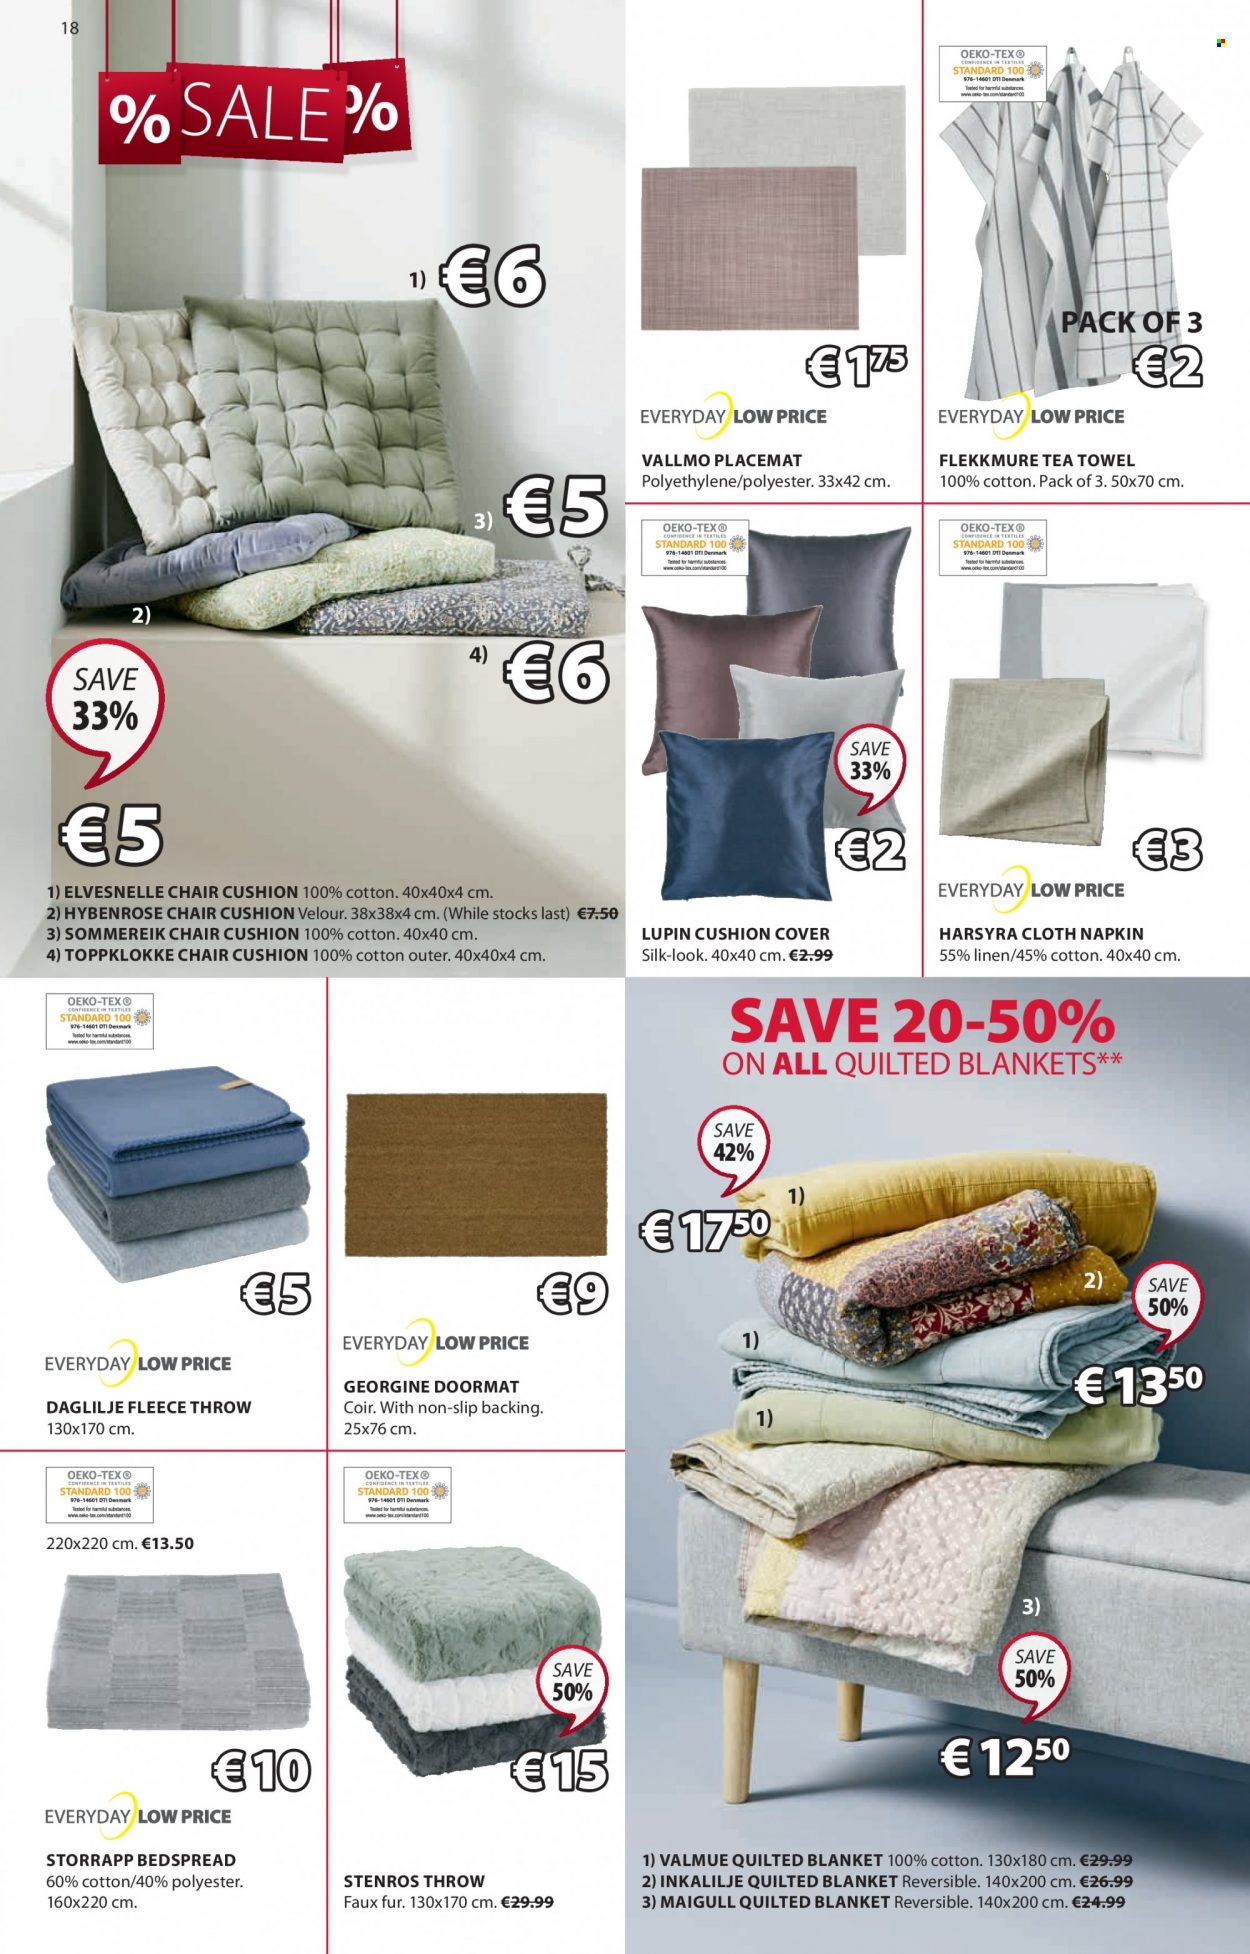 thumbnail - JYSK offer  - 24.12.2021 - 05.01.2022 - Sales products - chair, cushion, placemat, napkins, tea towels, bedspread, blanket, linens, fleece throw, door mat. Page 18.